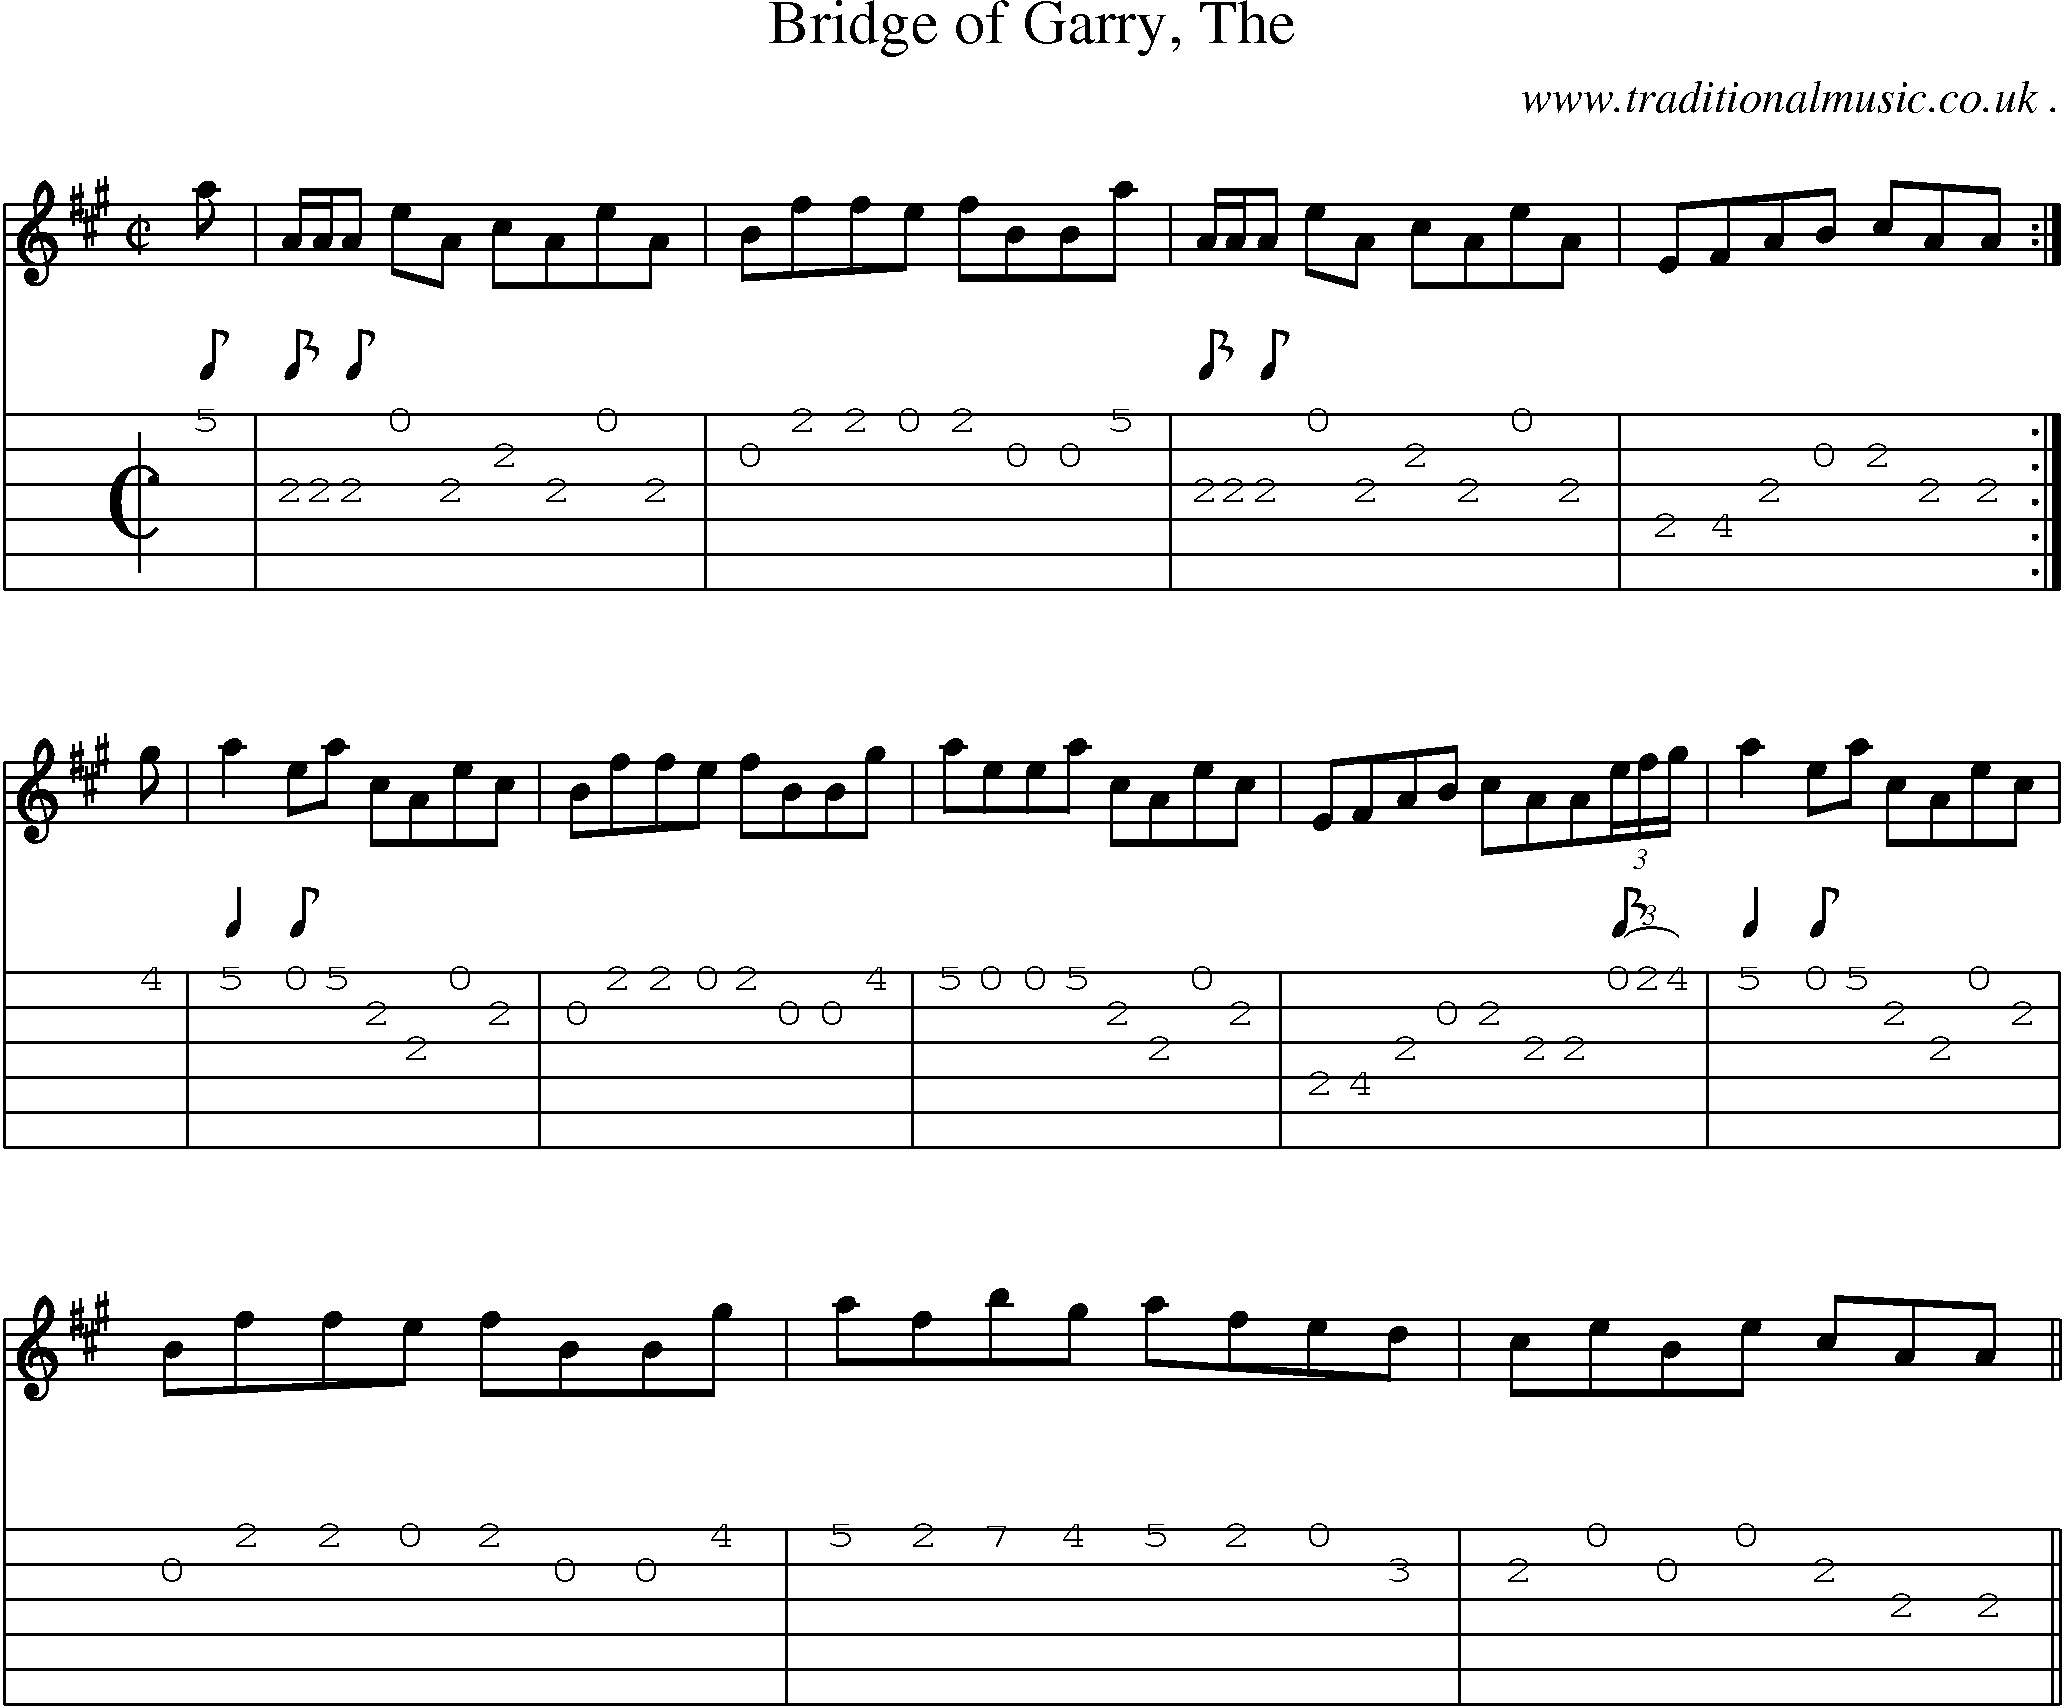 Sheet-music  score, Chords and Guitar Tabs for Bridge Of Garry The